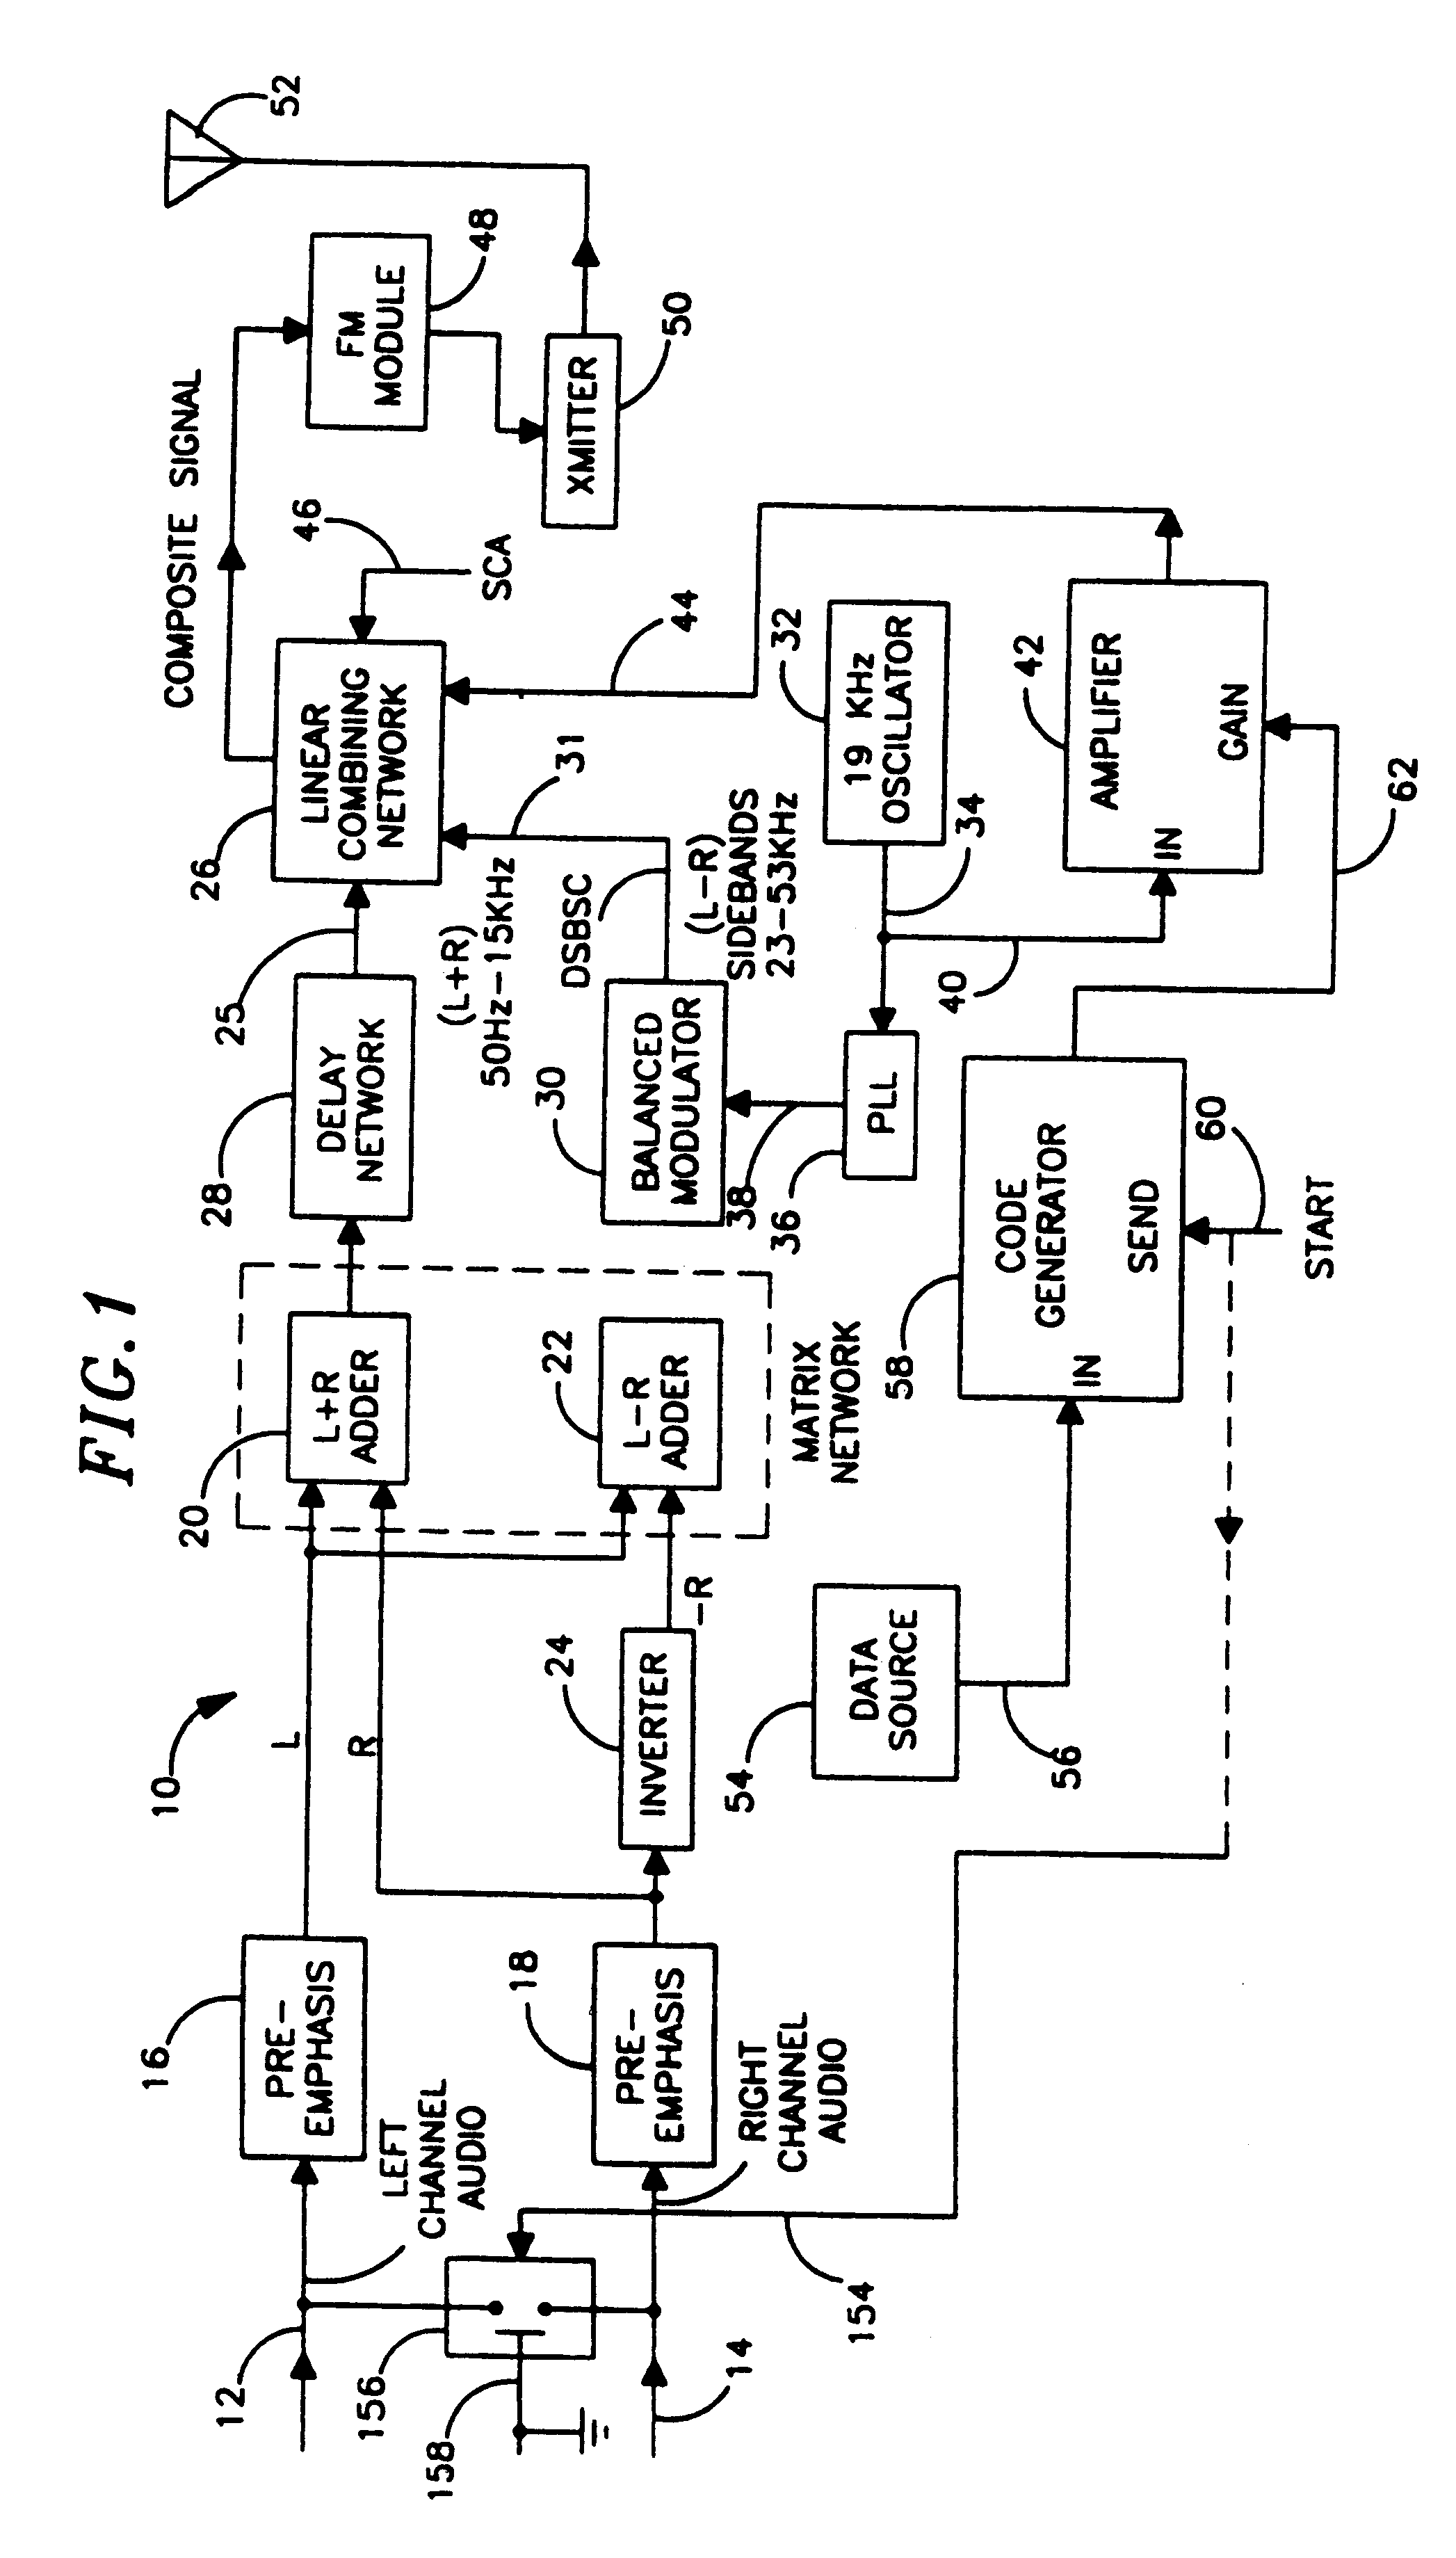 Apparatus and methods for music and lyrics broadcasting